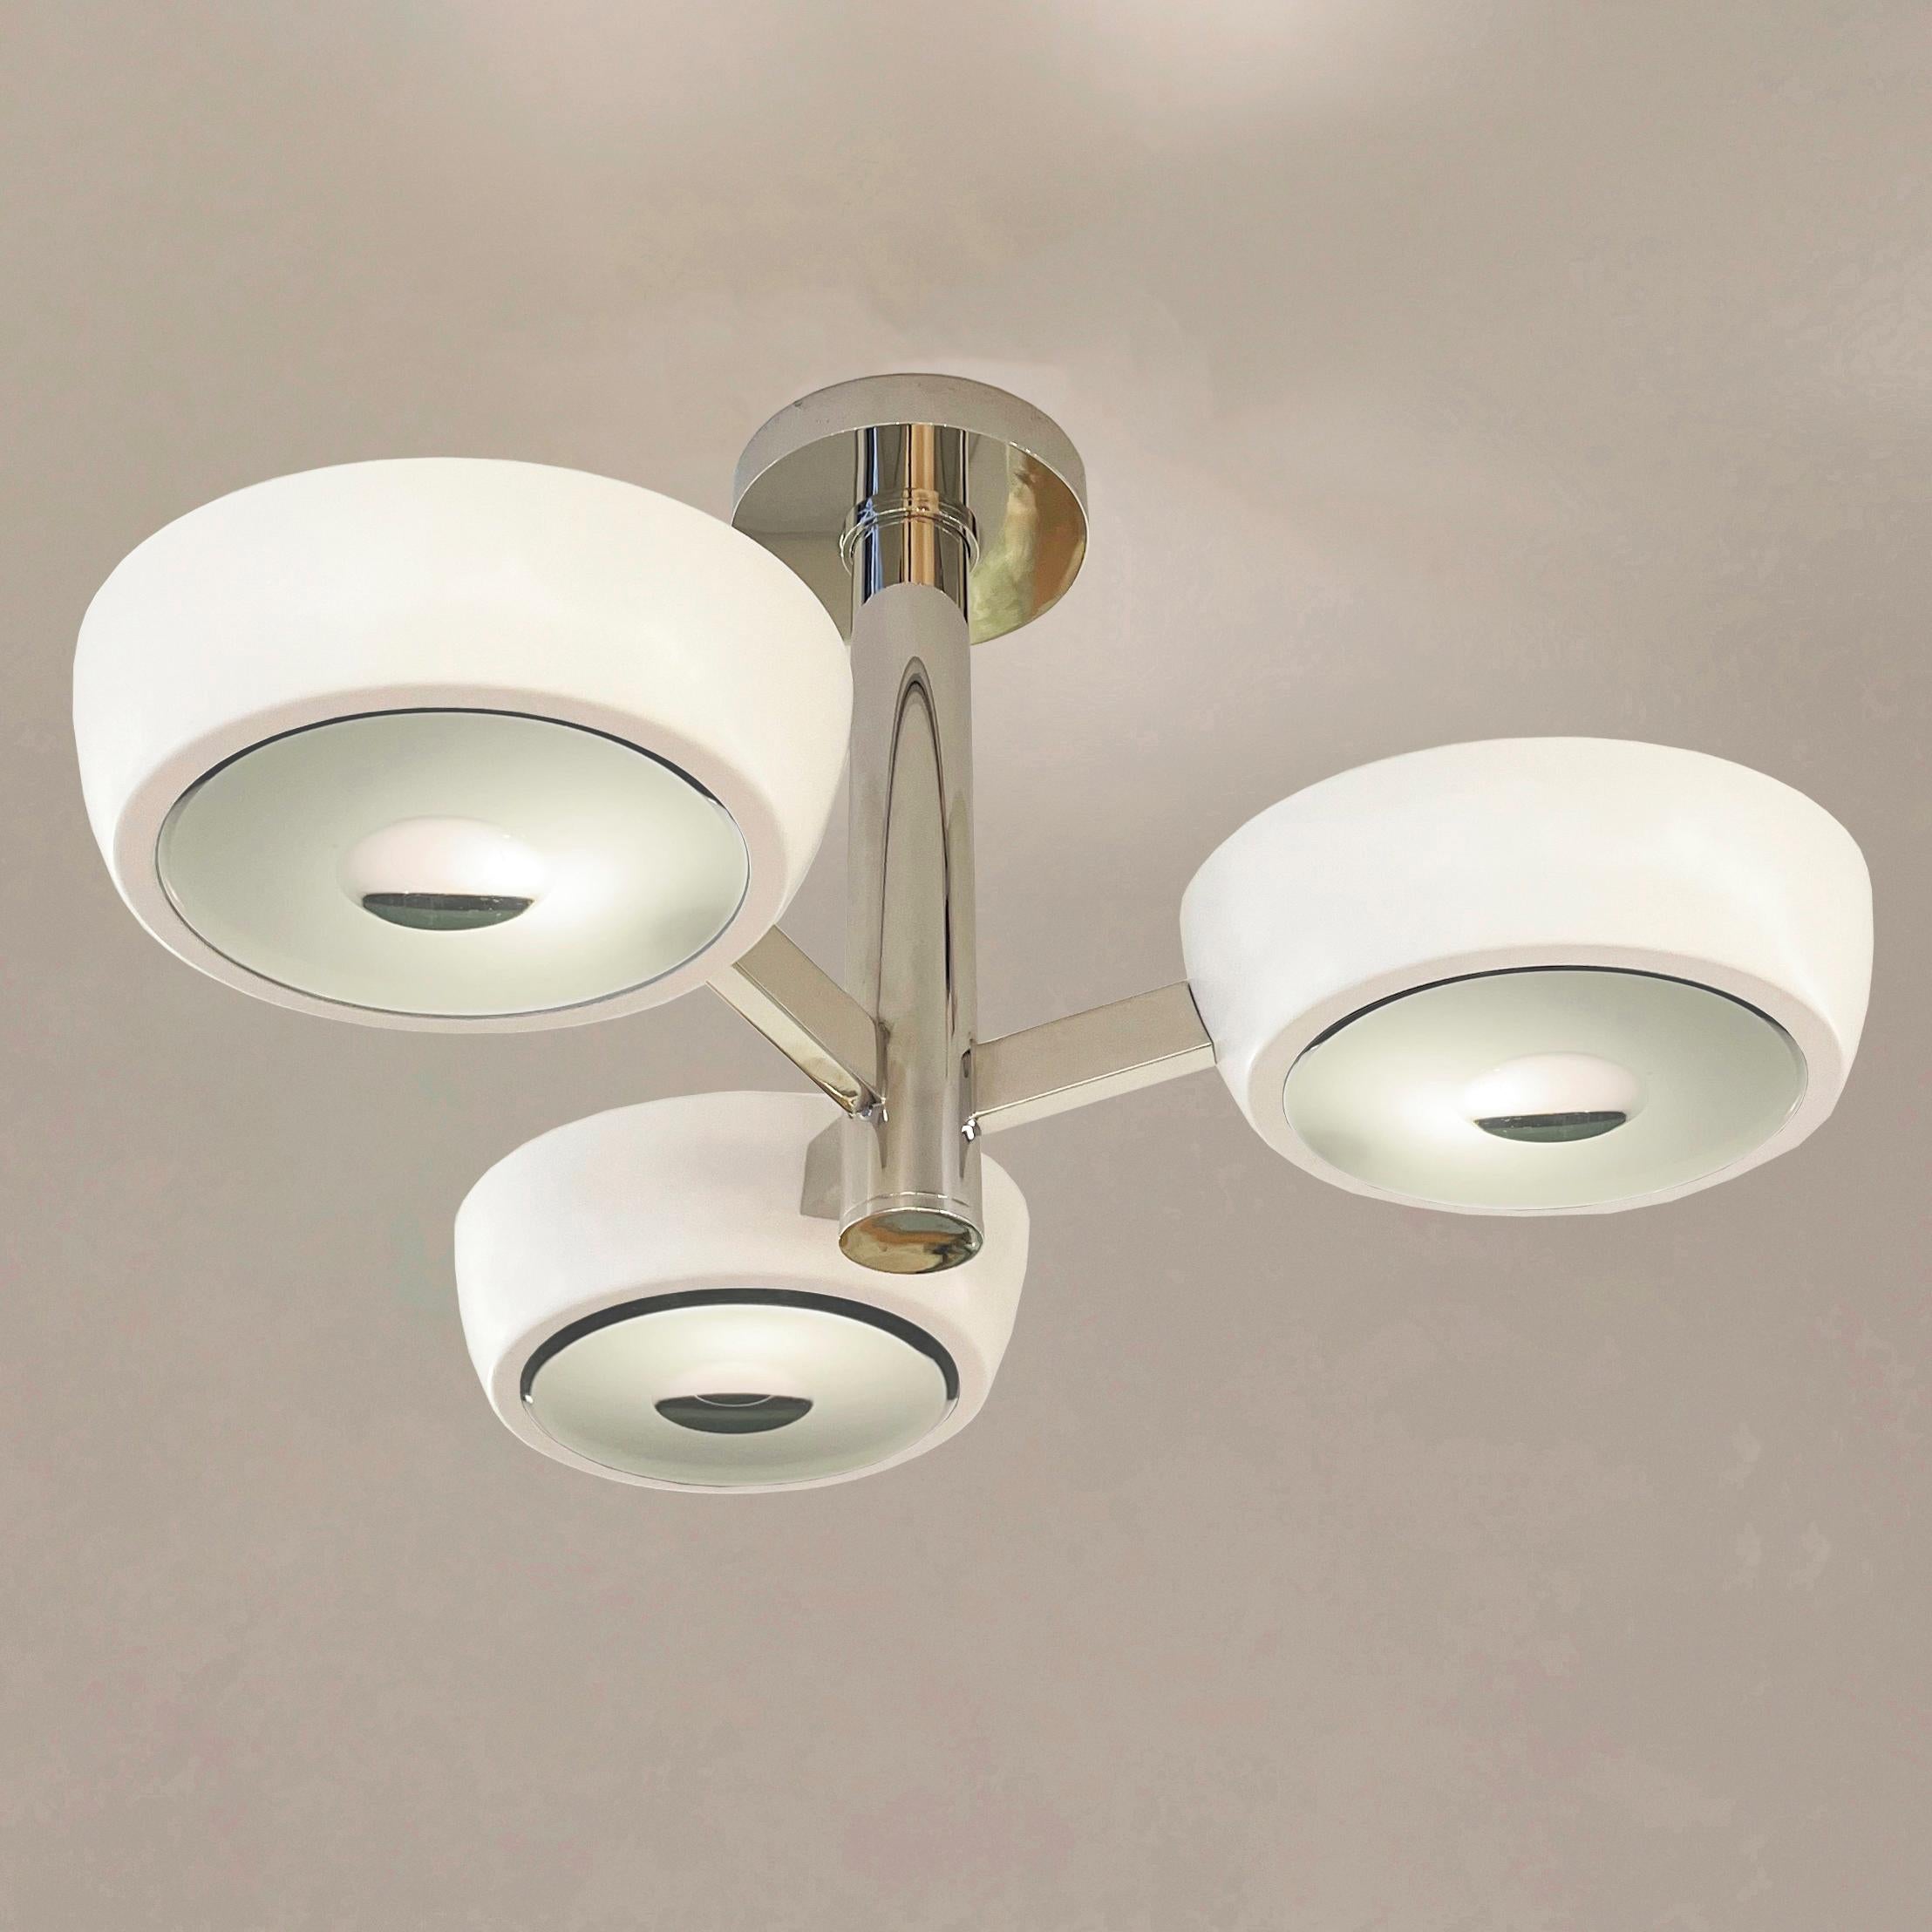 The Rose Piccolo ceiling light is the smallest member of the Rose family, distinguished by its branching frame ending with clean and modern shades. With the option to customize the color of the shades, the finish of the metal and the type of glass,